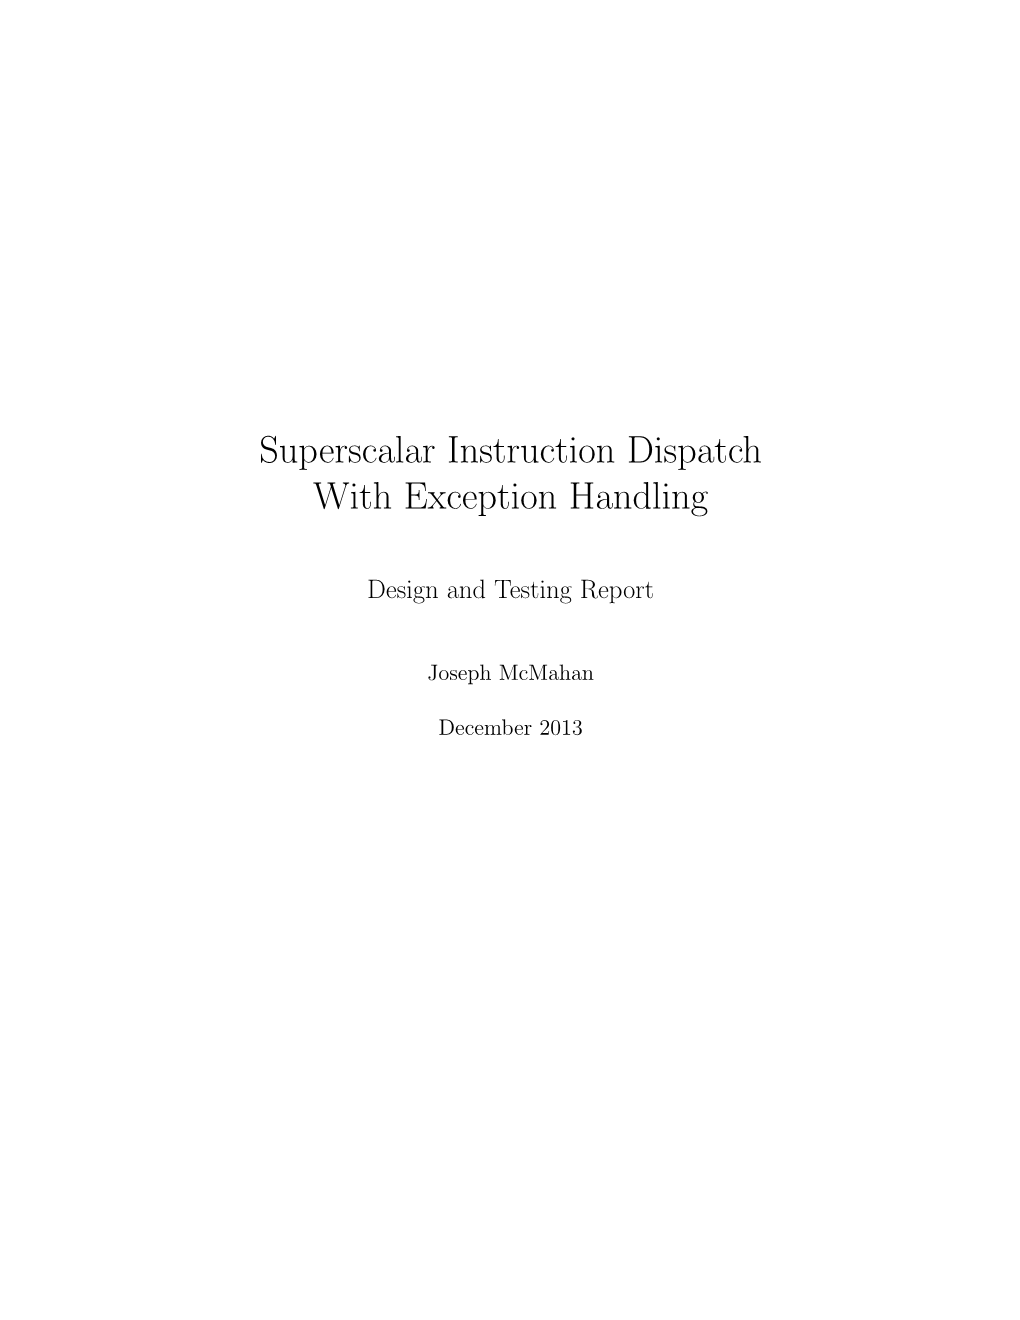 Superscalar Instruction Dispatch with Exception Handling